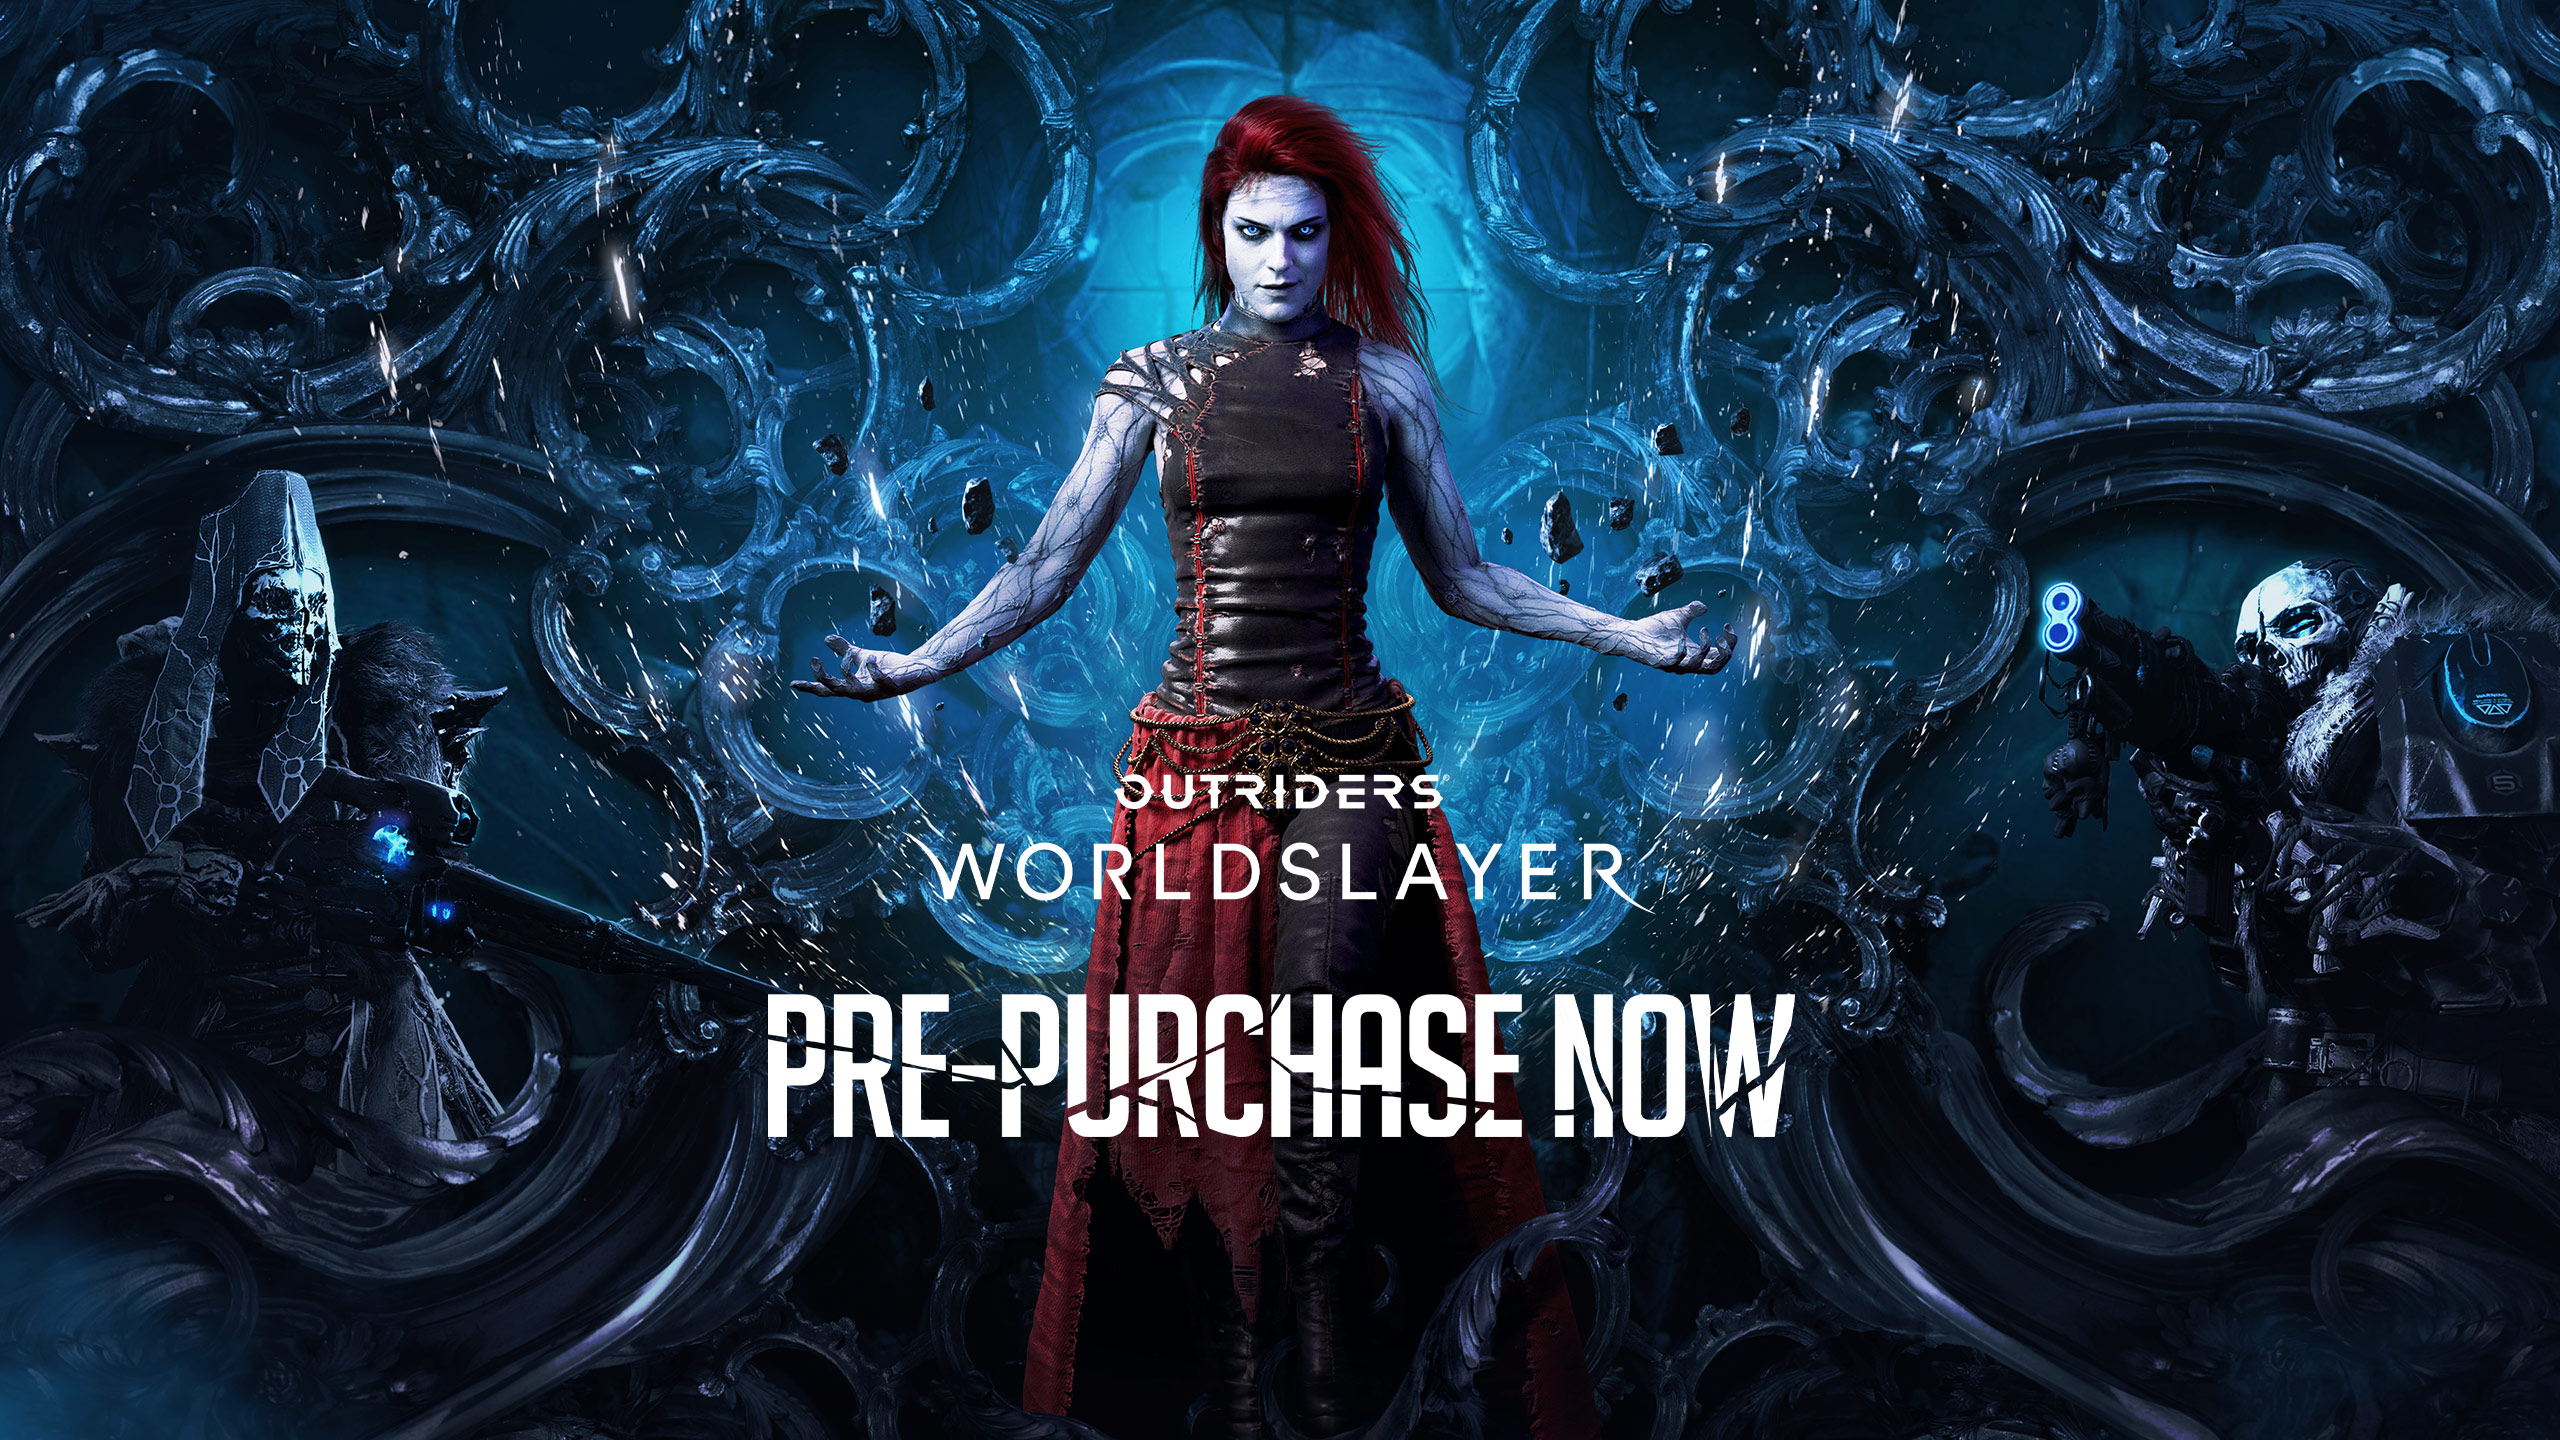 #OUTRIDERS : WORLDSLAYER EST DISPONIBLE